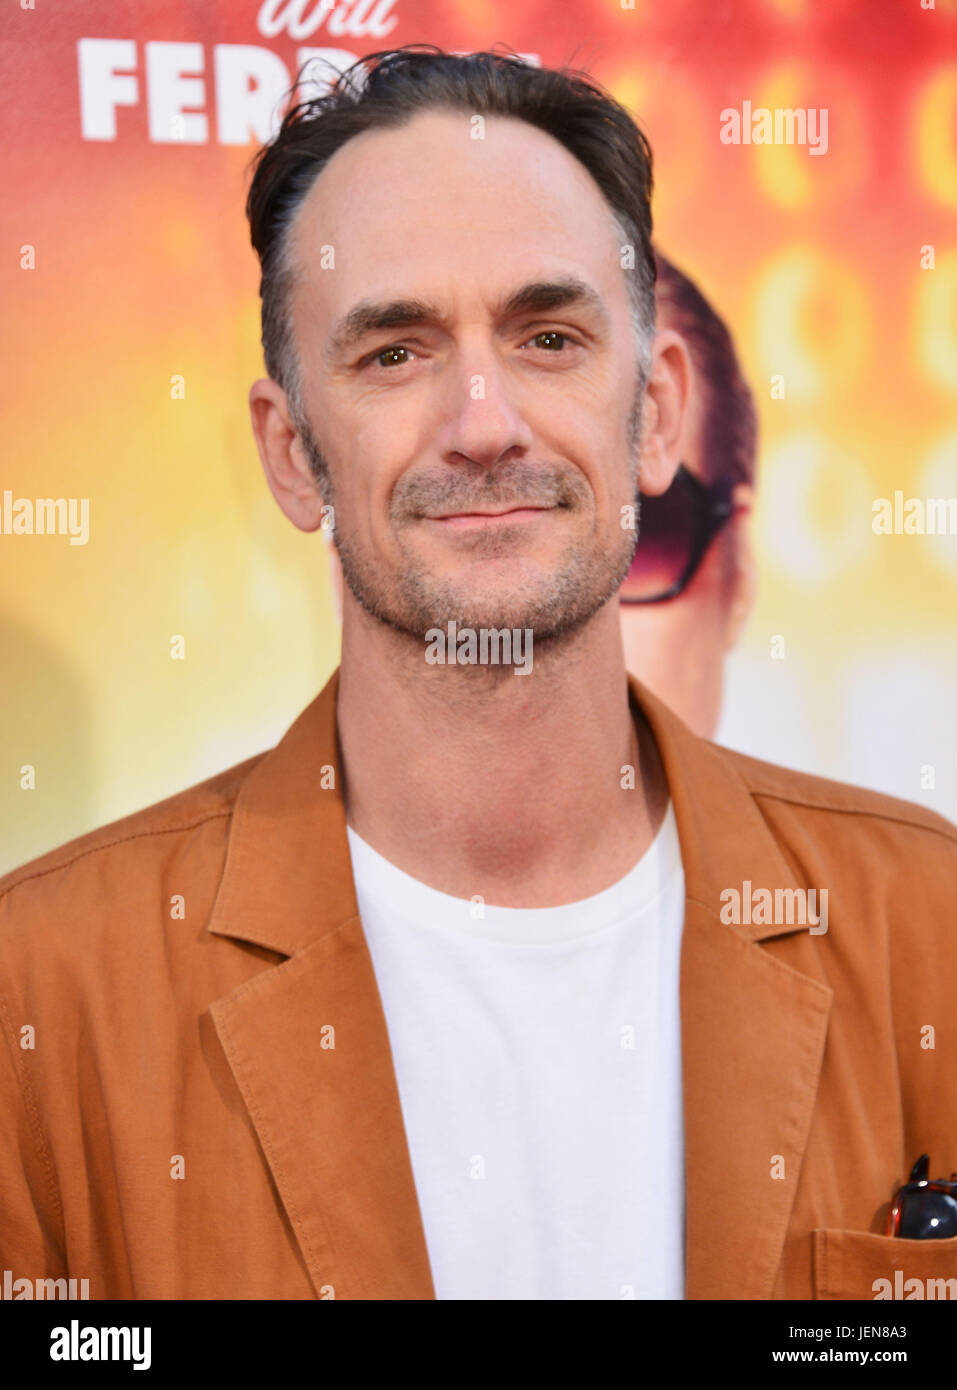 Los Angeles, USA. 26th June, 2017. Seth Morris at The House Premiere at the TCL Chinese Theatre in Los Angeles. June 26 2017. Credit: Tsuni/USA/Alamy Live News Stock Photo